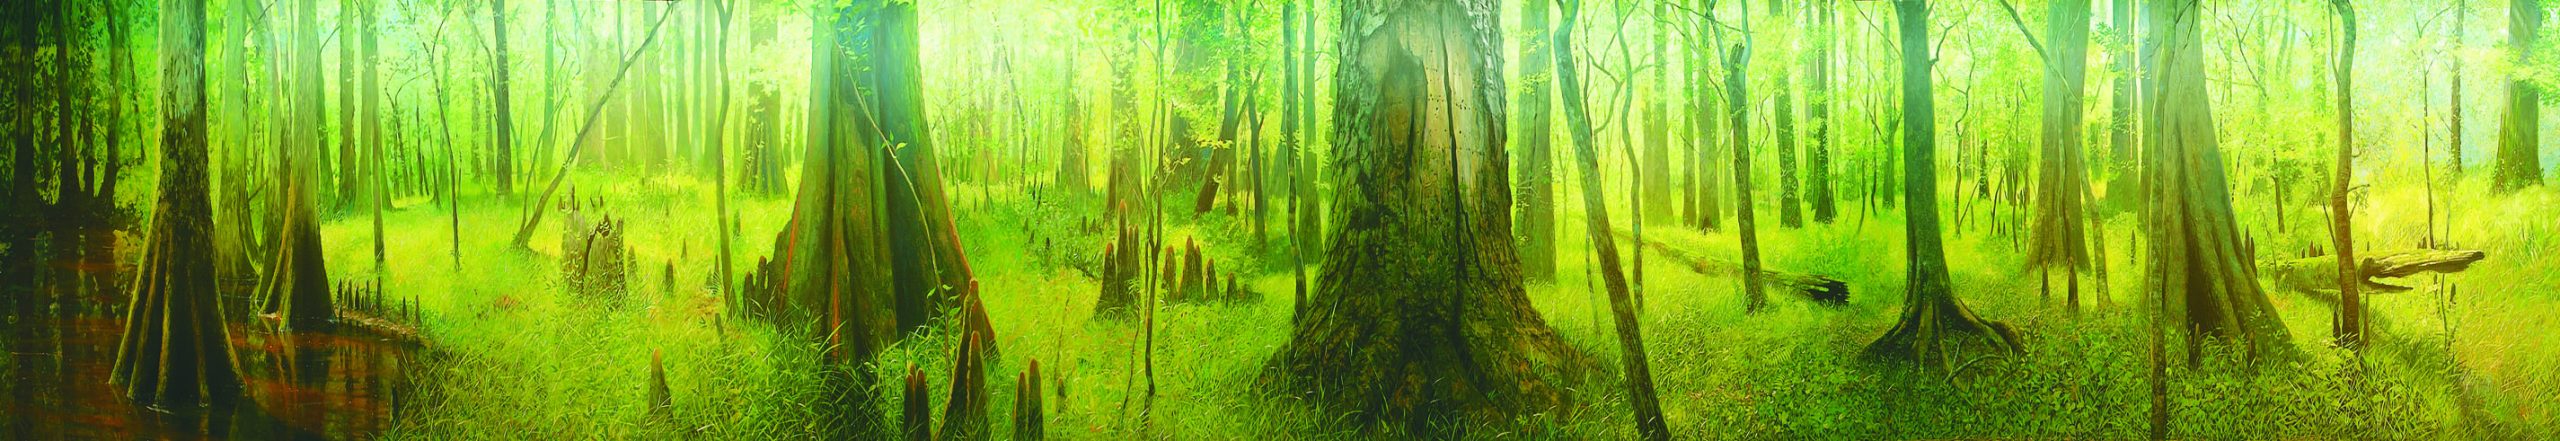 Congaree Swamp mural, painted on location in the lobby of the Congaree National Park Visitors Center, 2002, approximately 11 feet by 80 feet. Public collection in a federal park. 
Photography courtesy of Lynn Sky